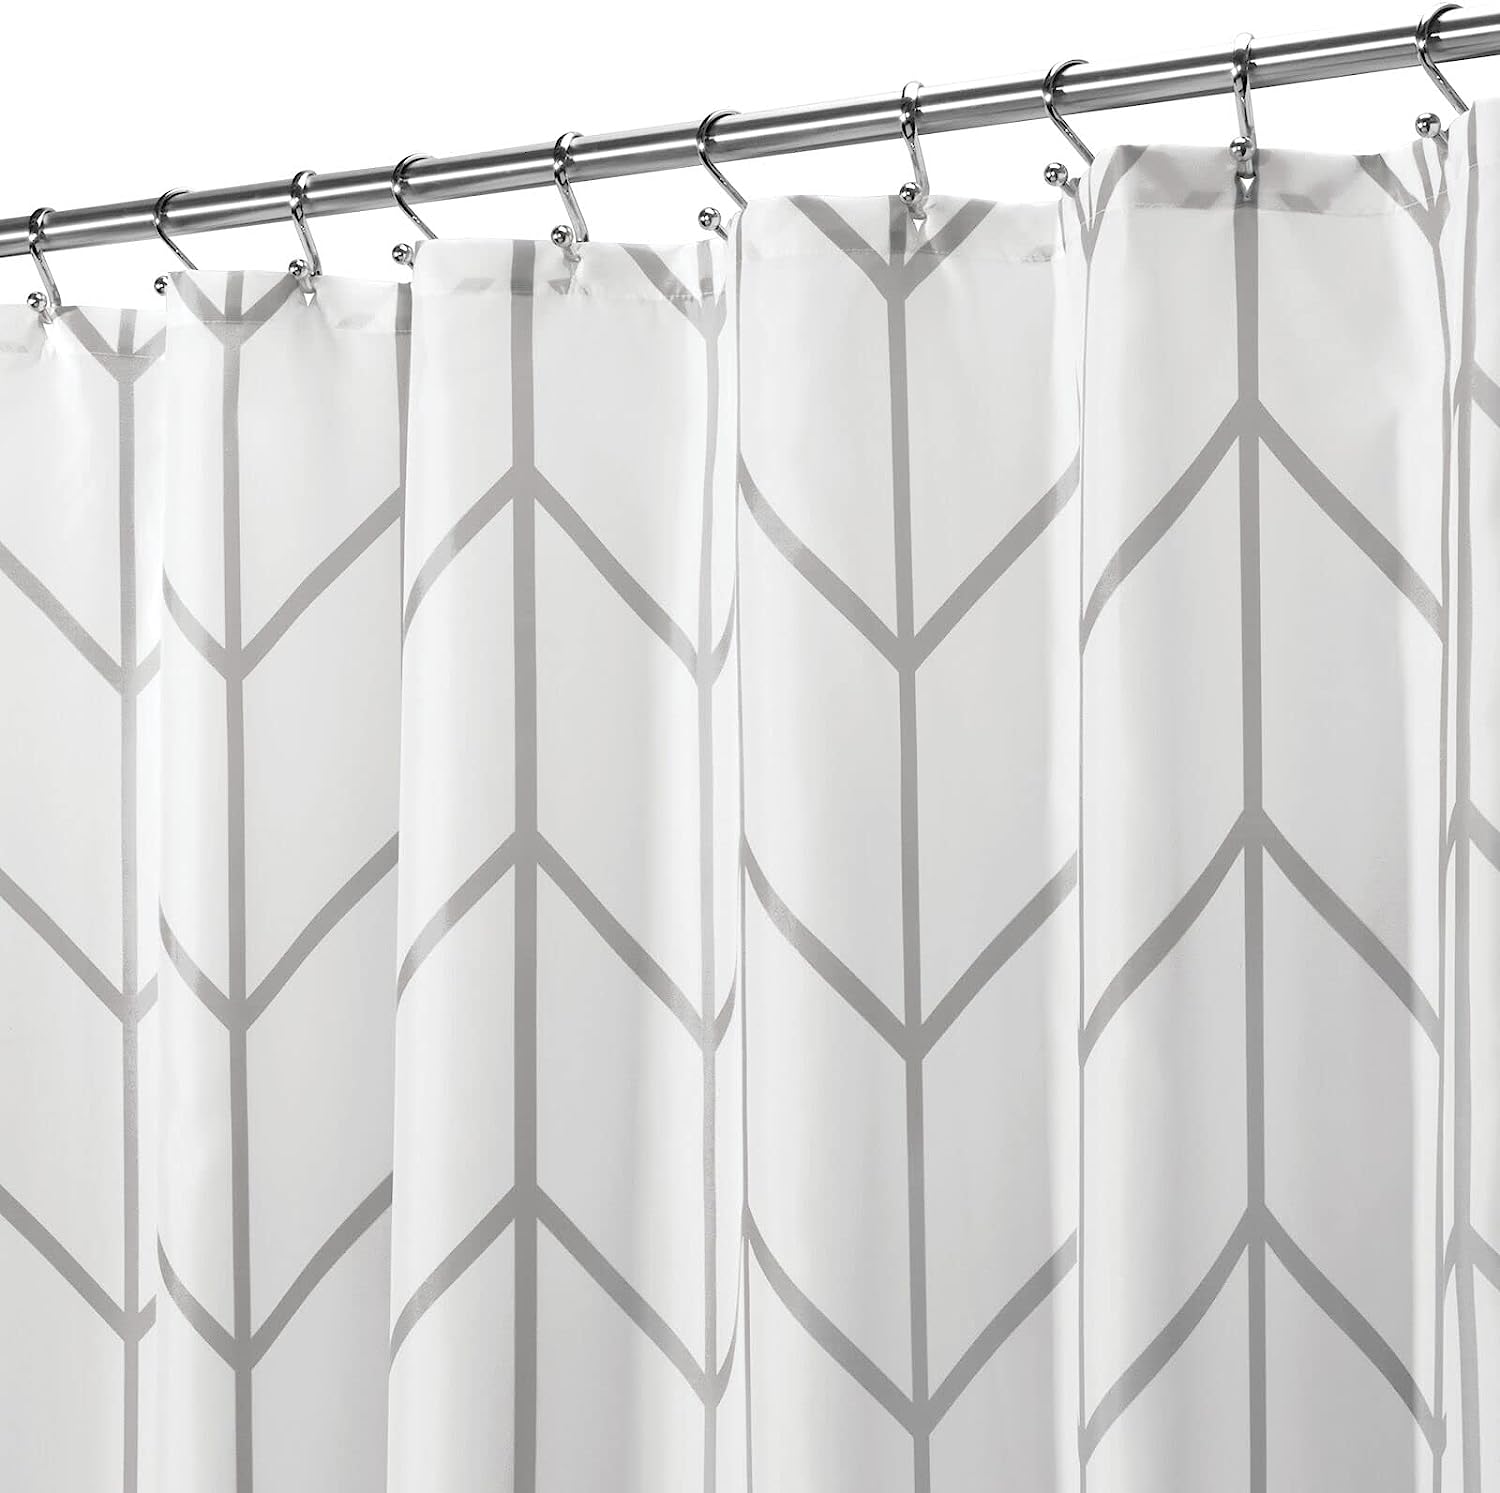 mDesign Fabric Geometric Shower Curtain Review